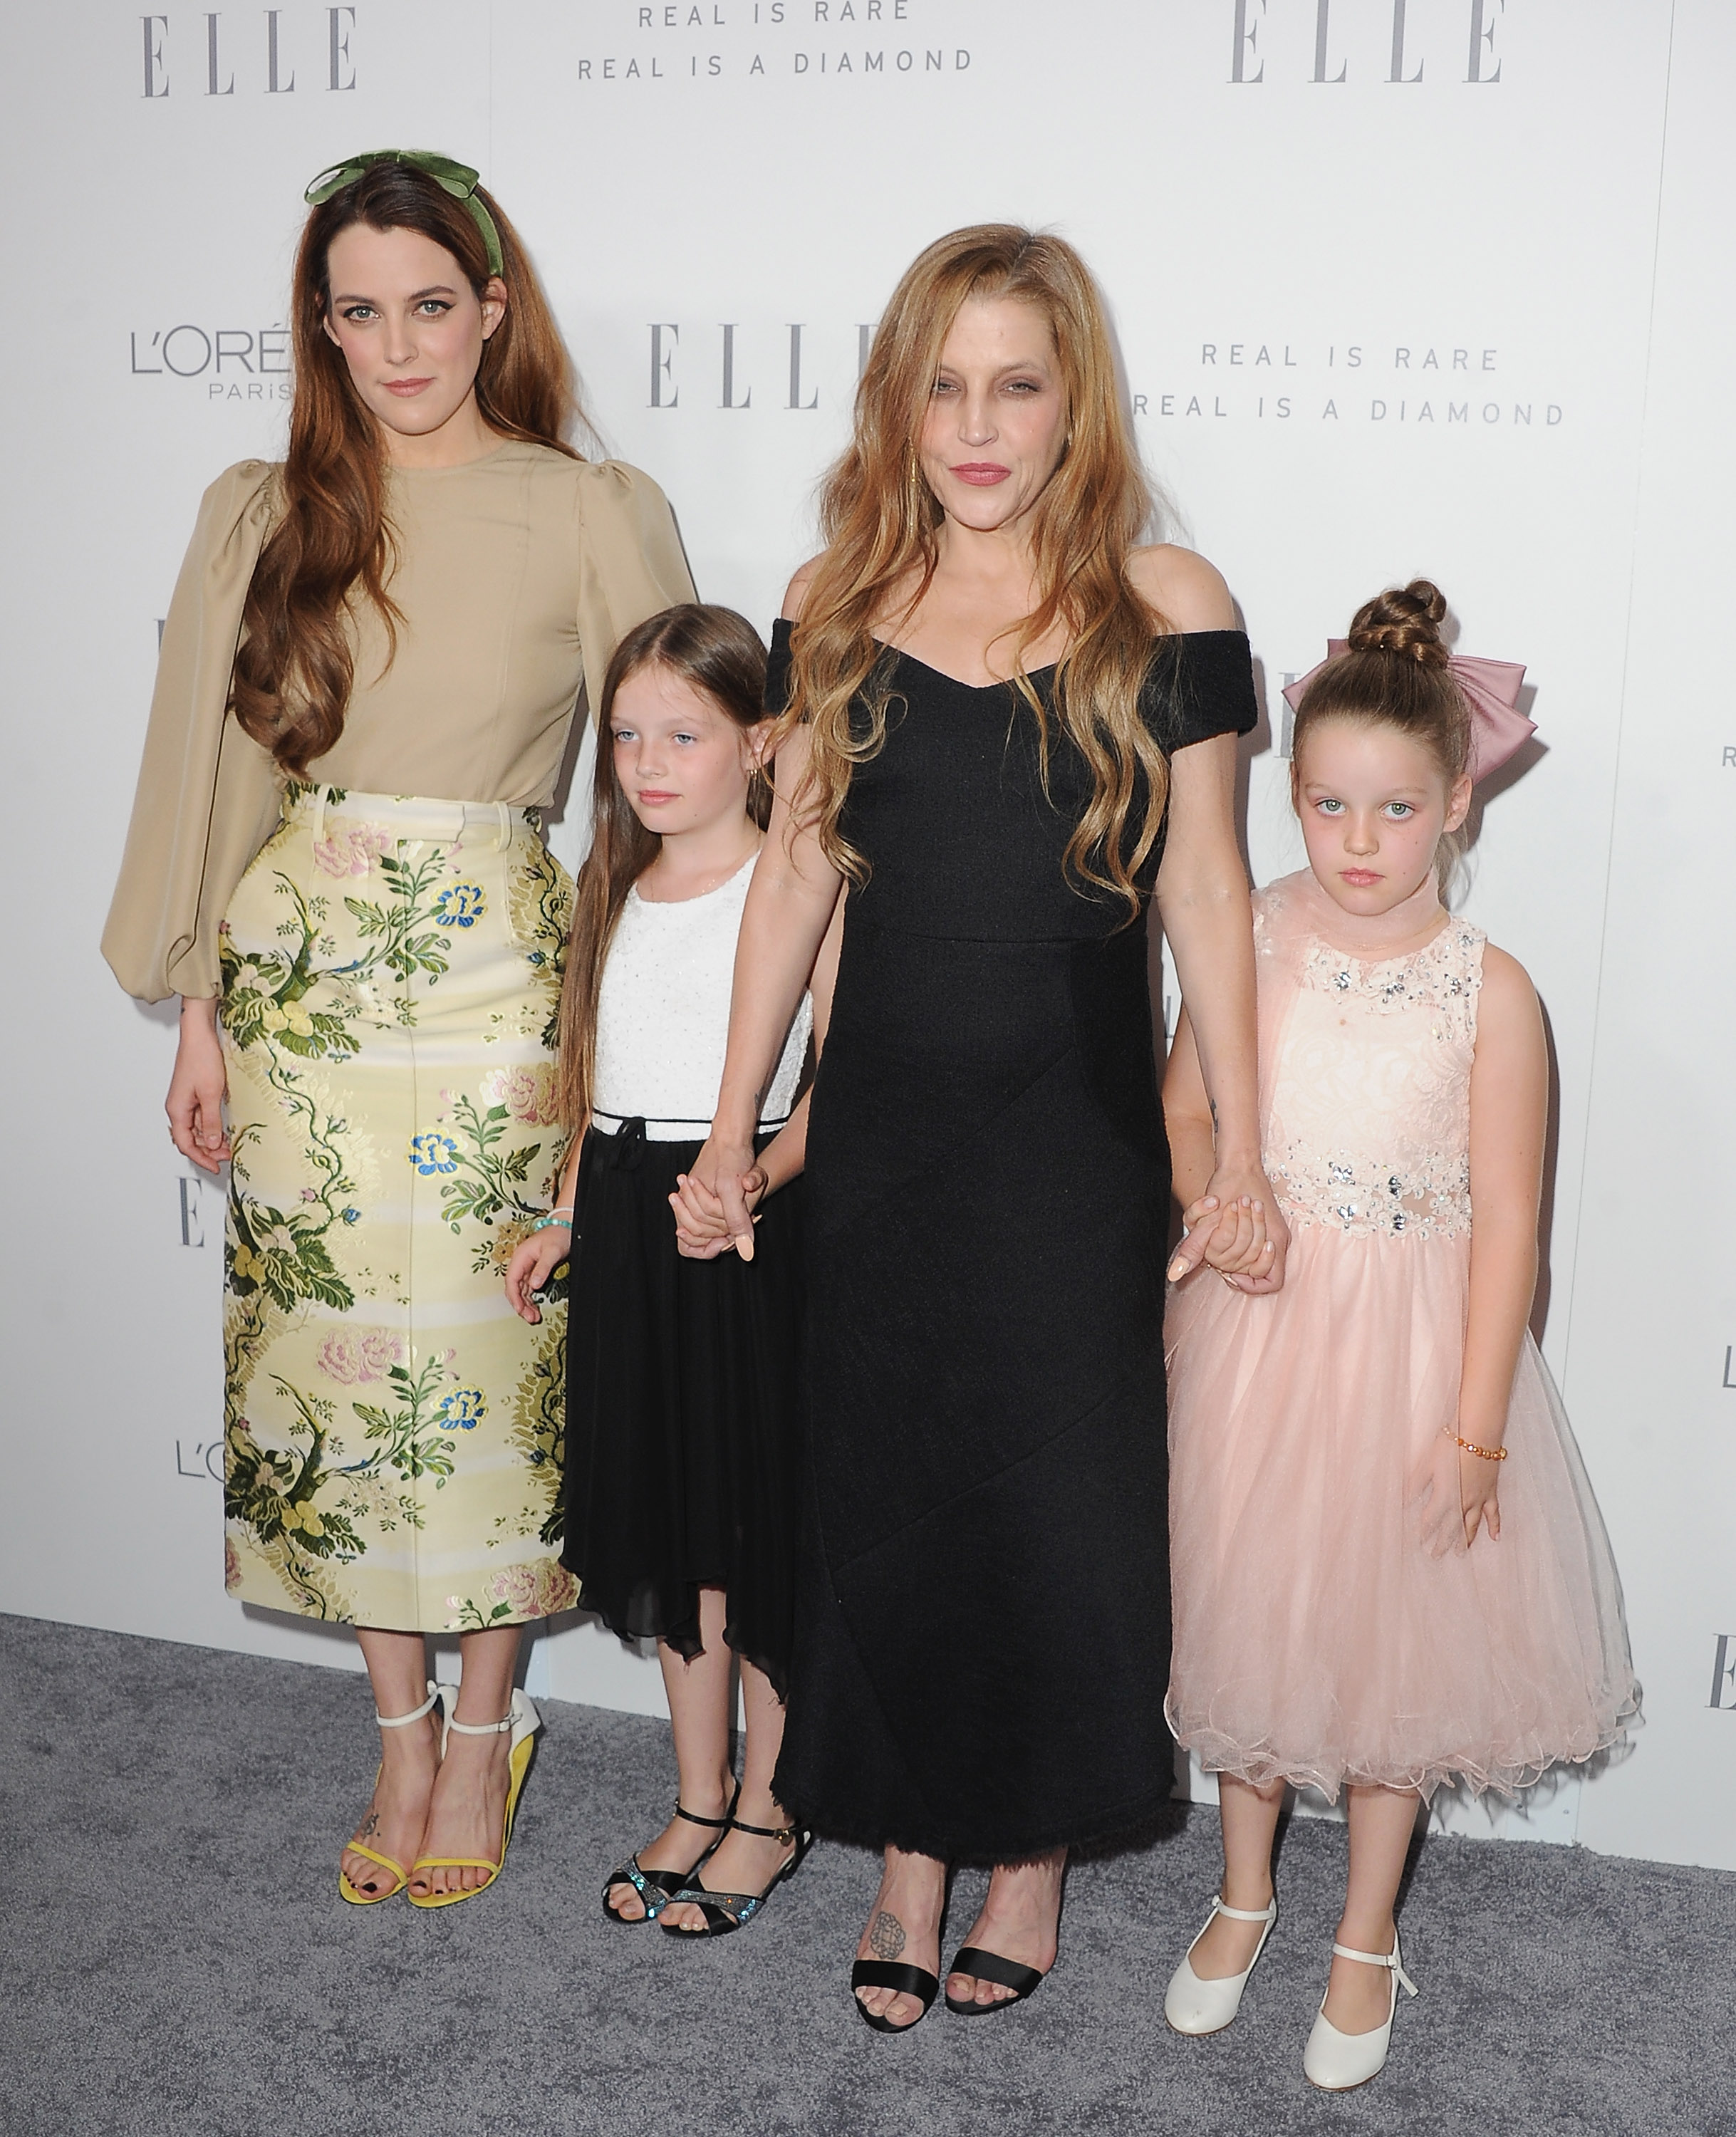 Lisa Marie Presley Then and Now Elvis' Daughter Through the Years